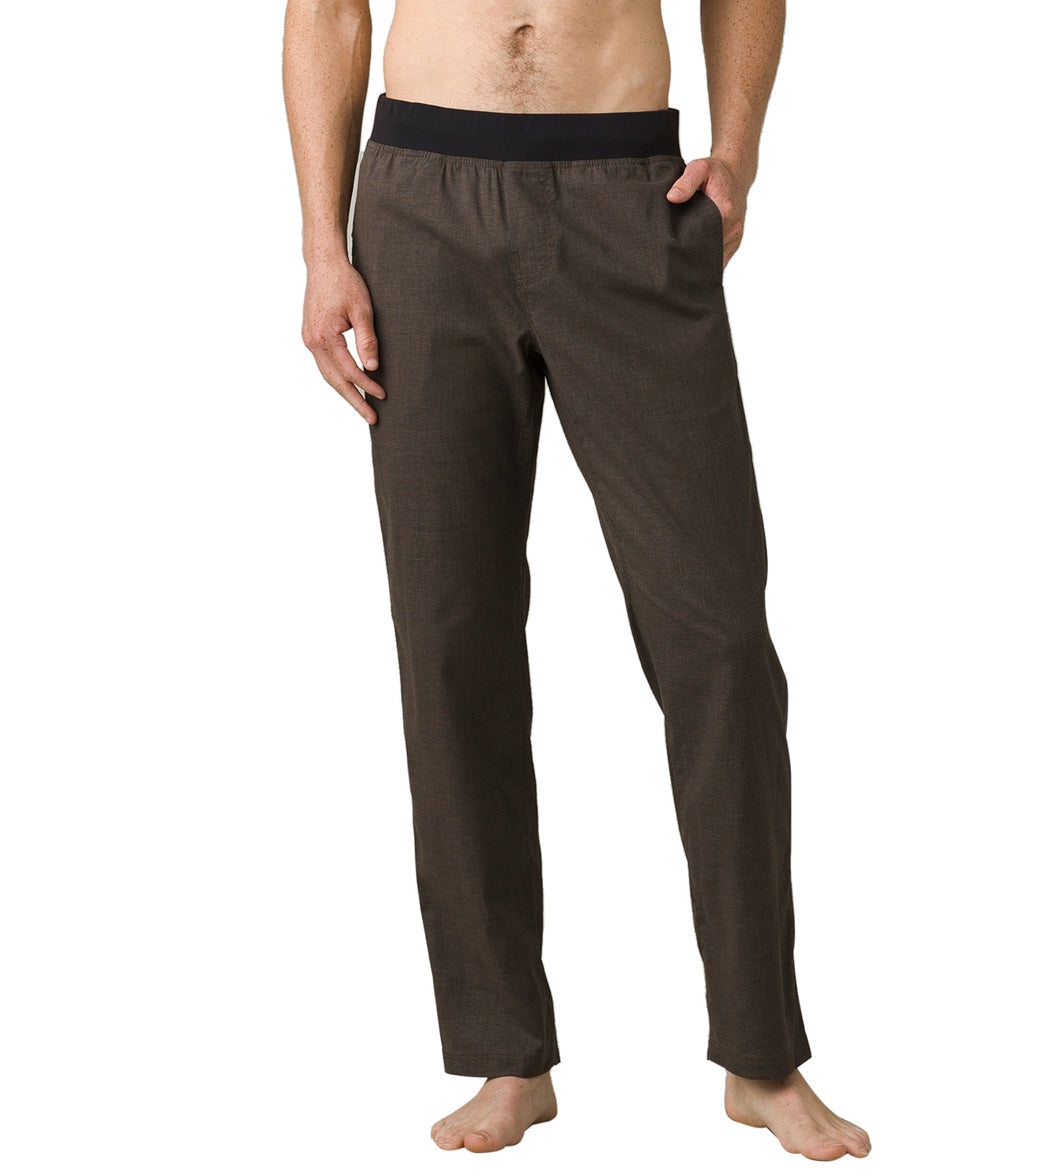 Pilates and yoga clothing for men